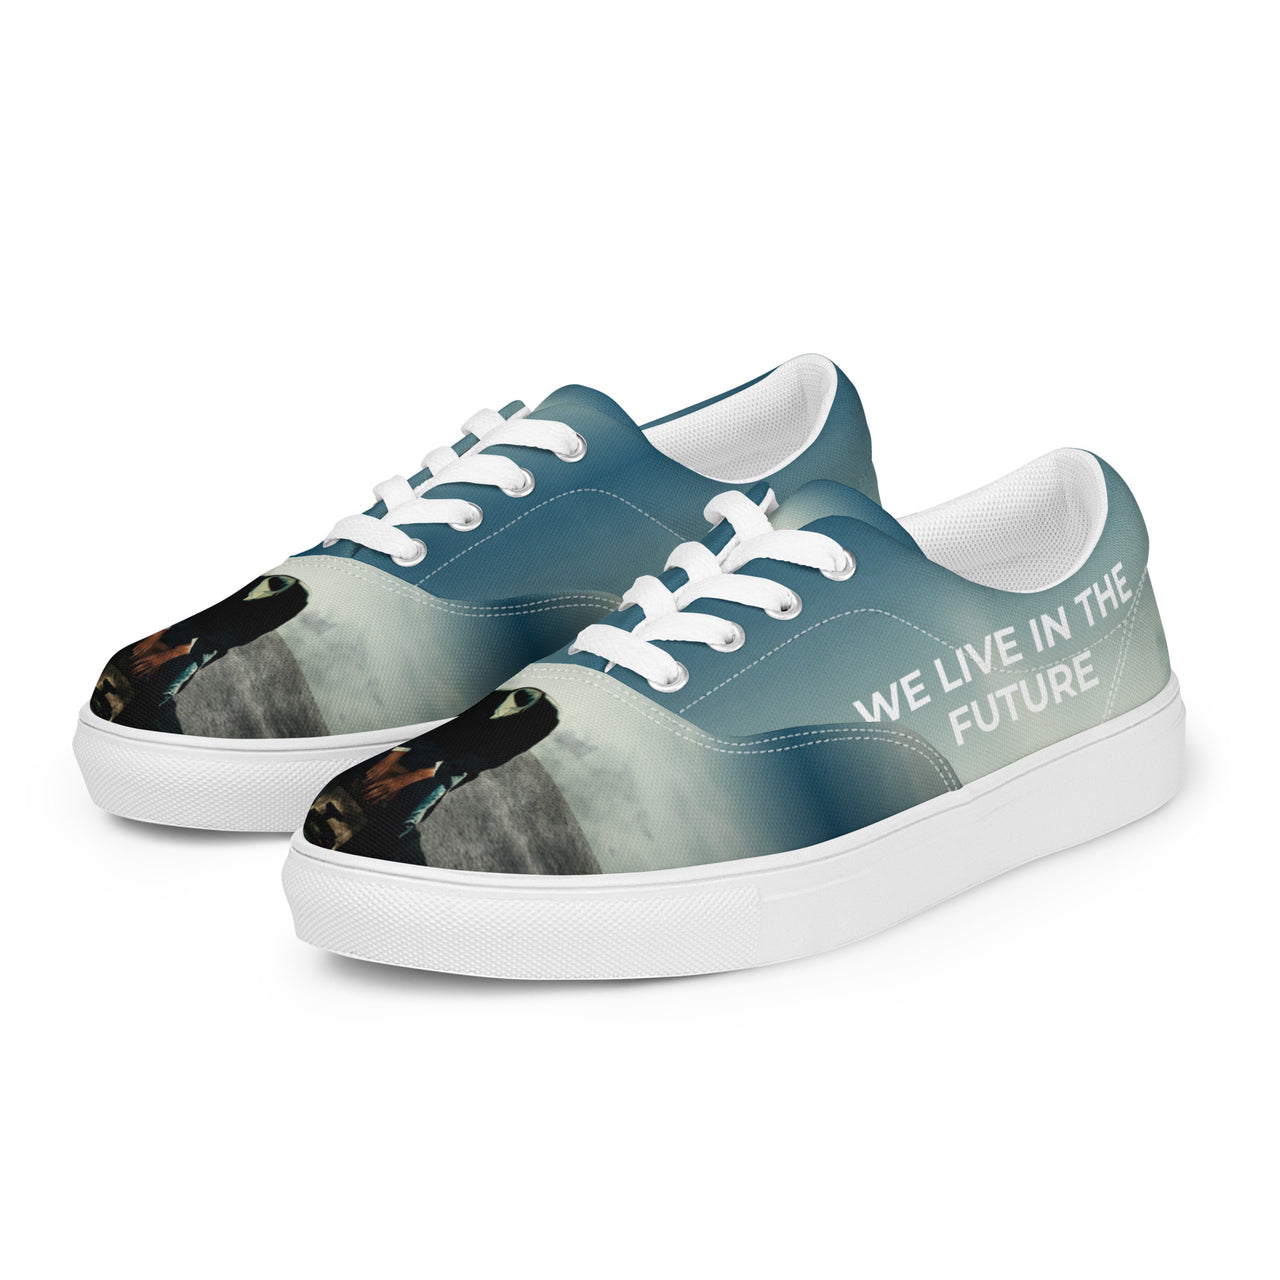 MENS SHOES - HOLLOW POET from "We Live In The Future" Special Edition Shoes Men’s lace-up canvas shoes